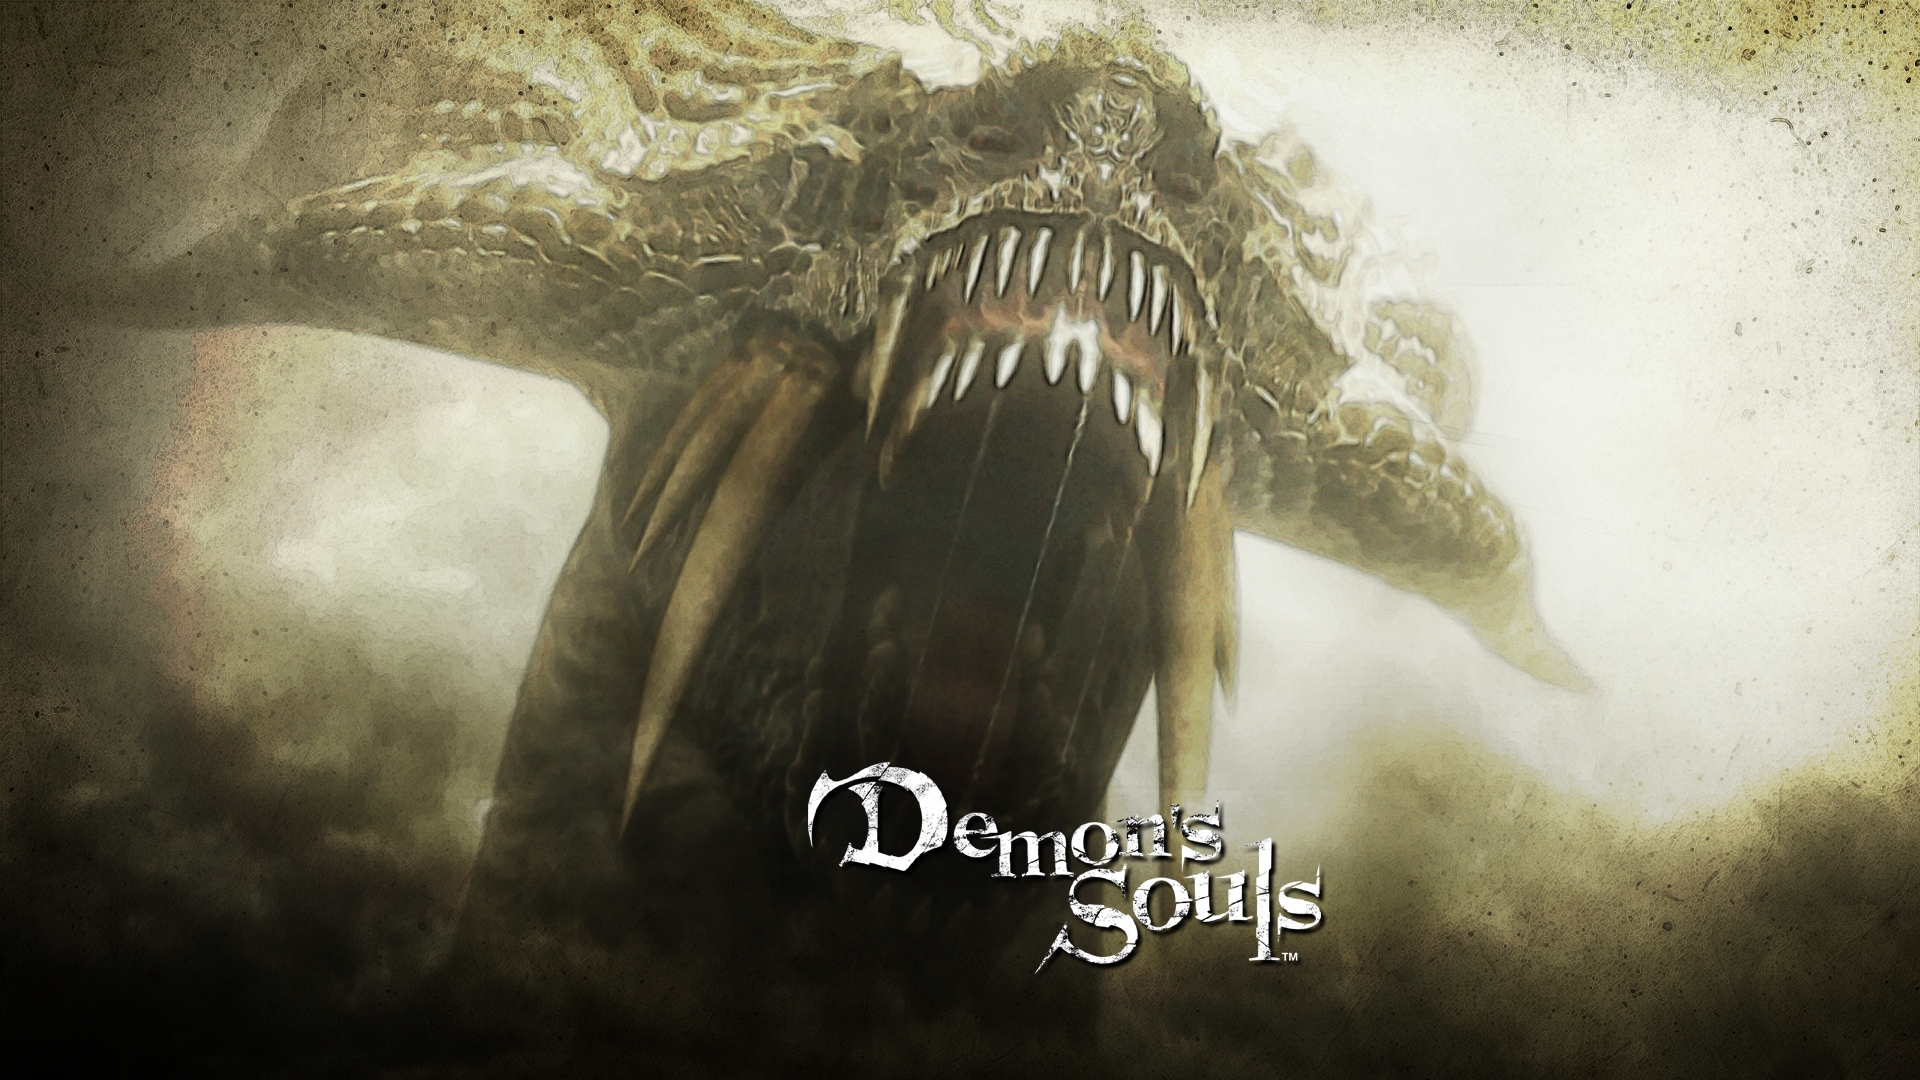  wallpapers of Demons Souls You are downloading Demons Souls wallpaper